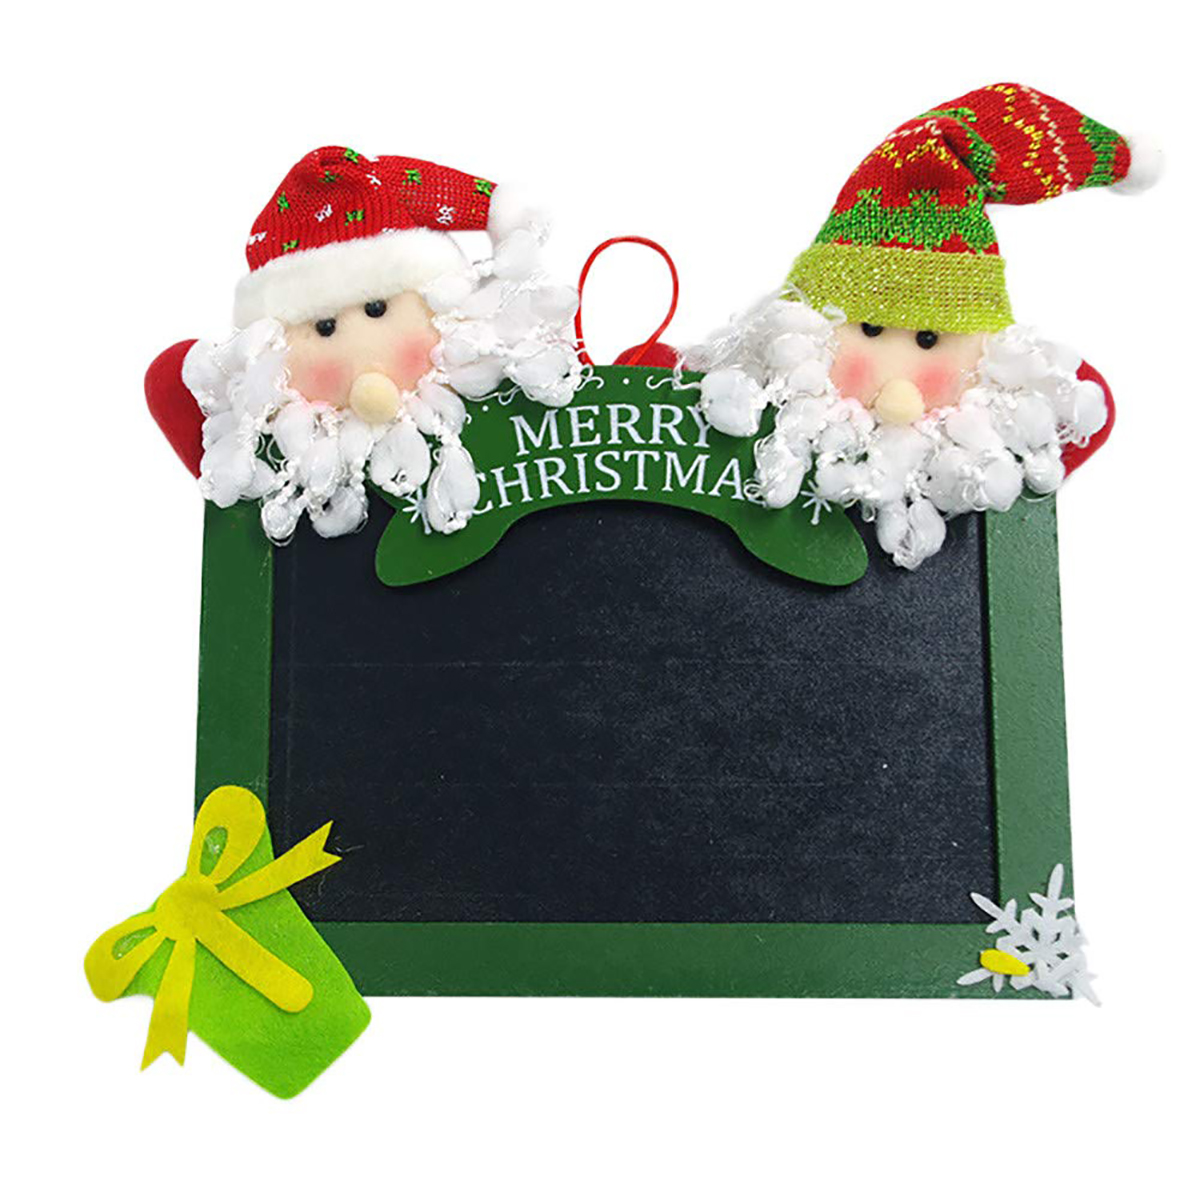 Merry-Christmas-Hanging-Sign-Wooden-Square-Blackboard-Wall-Door-Decoration-Hanging-Tags-for-DIY-Xmas-1904791-8